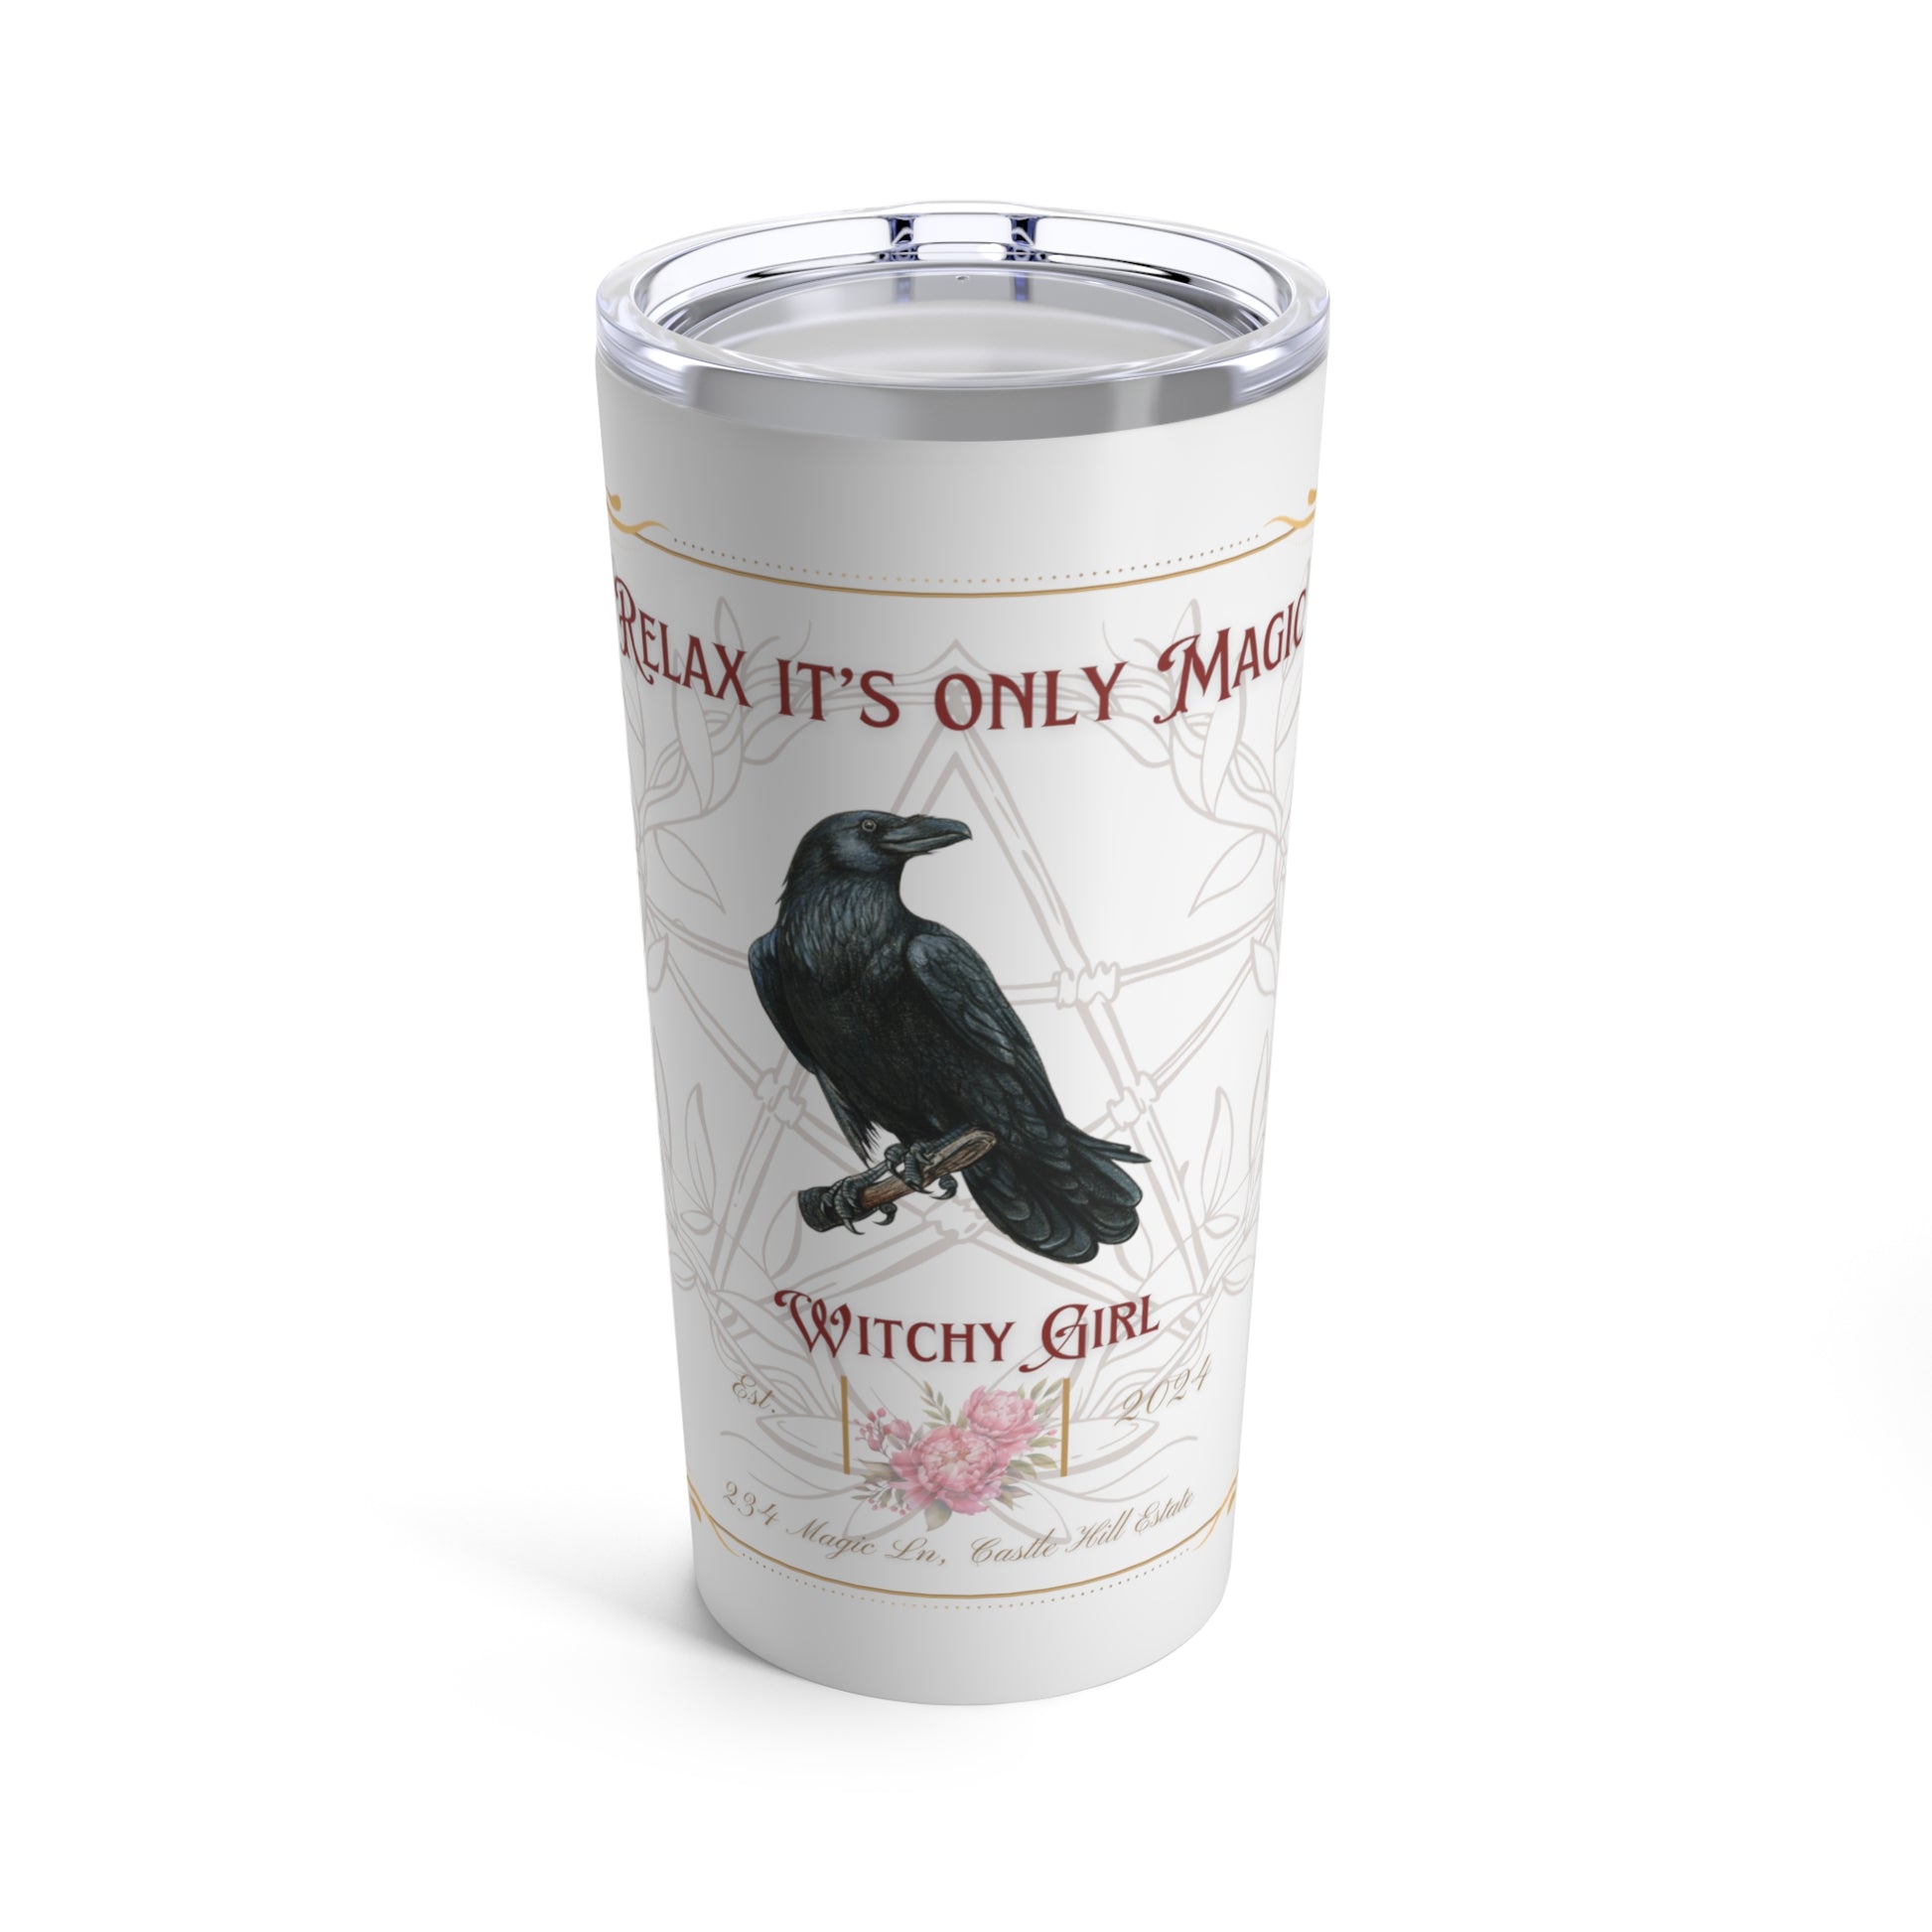 Witchy Girl Tumbler, Relax It's Only Magic Tumbler 20oz, Witchy Tumbler - The Witchy Gypsy